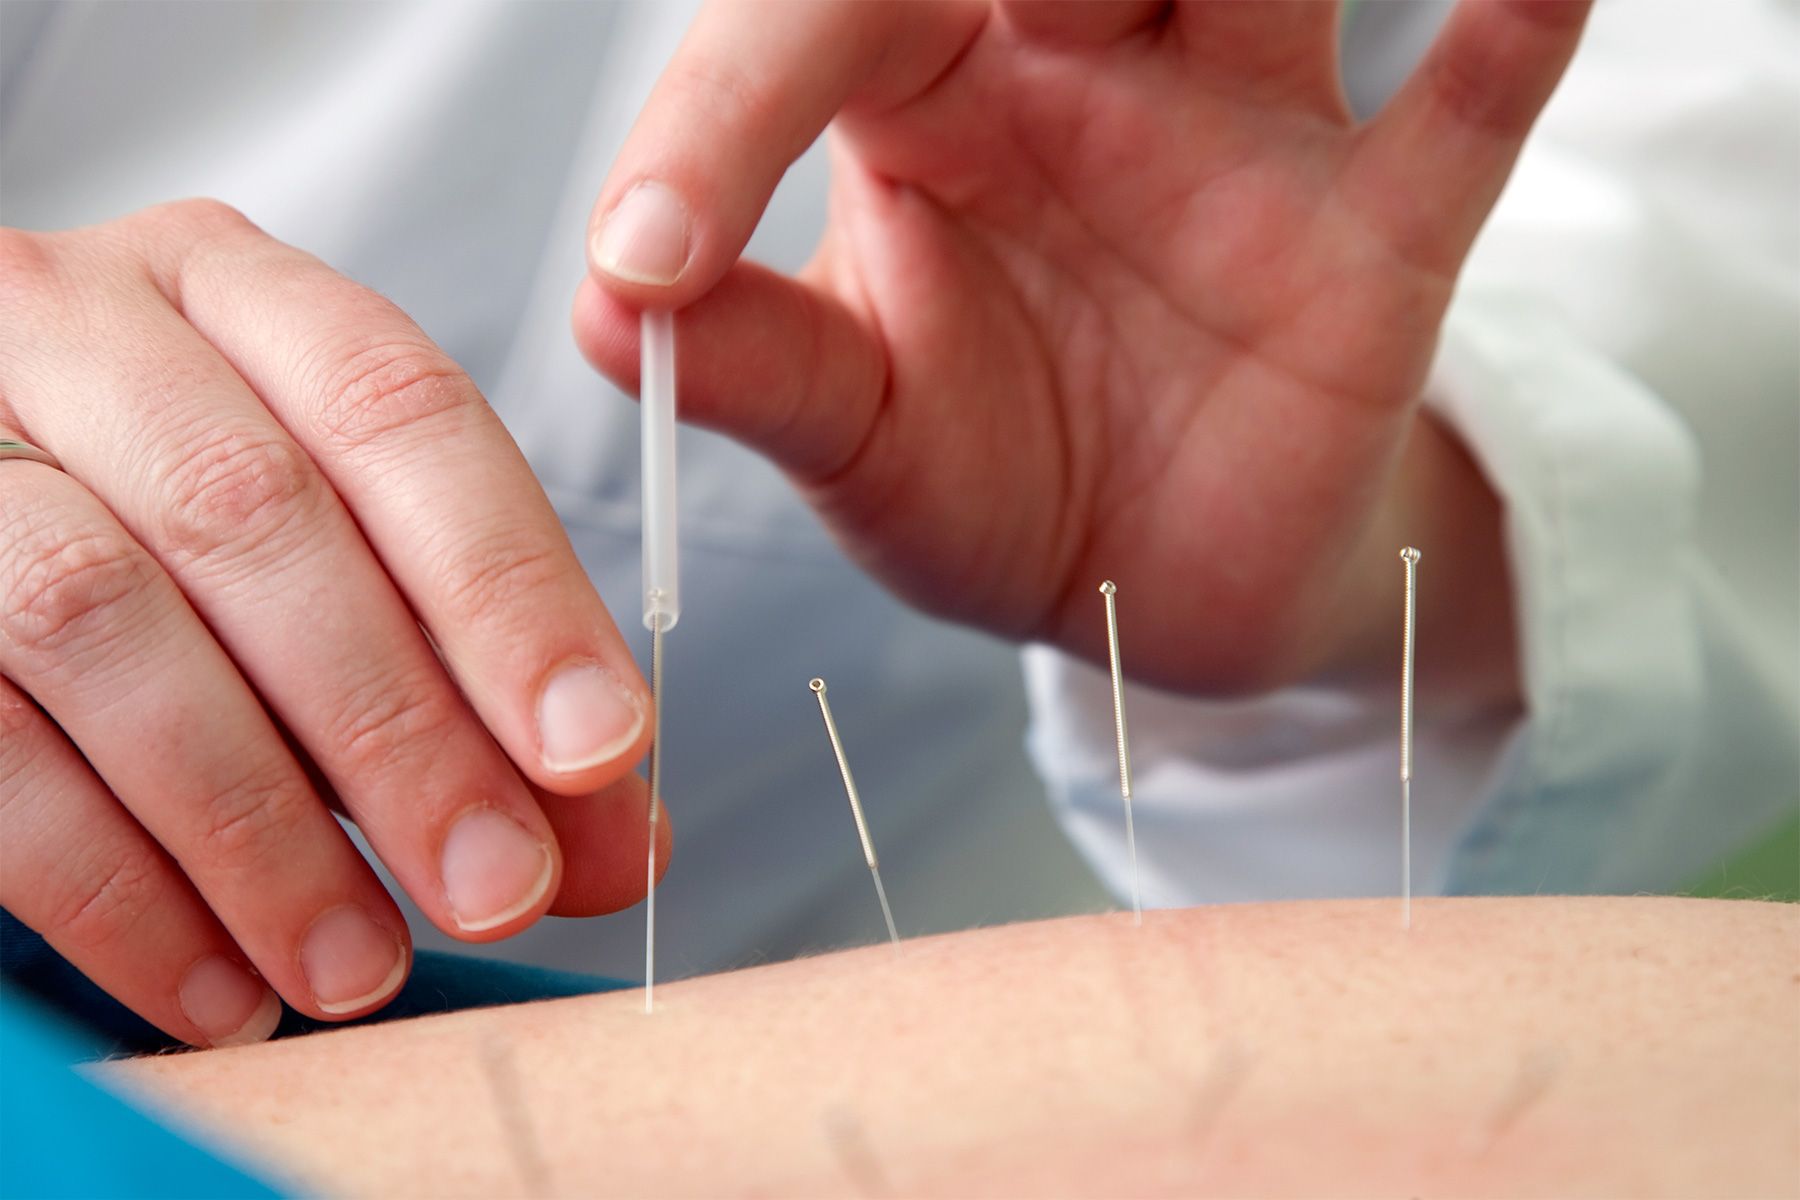 Acupuncture On Point for COVID stress Relief